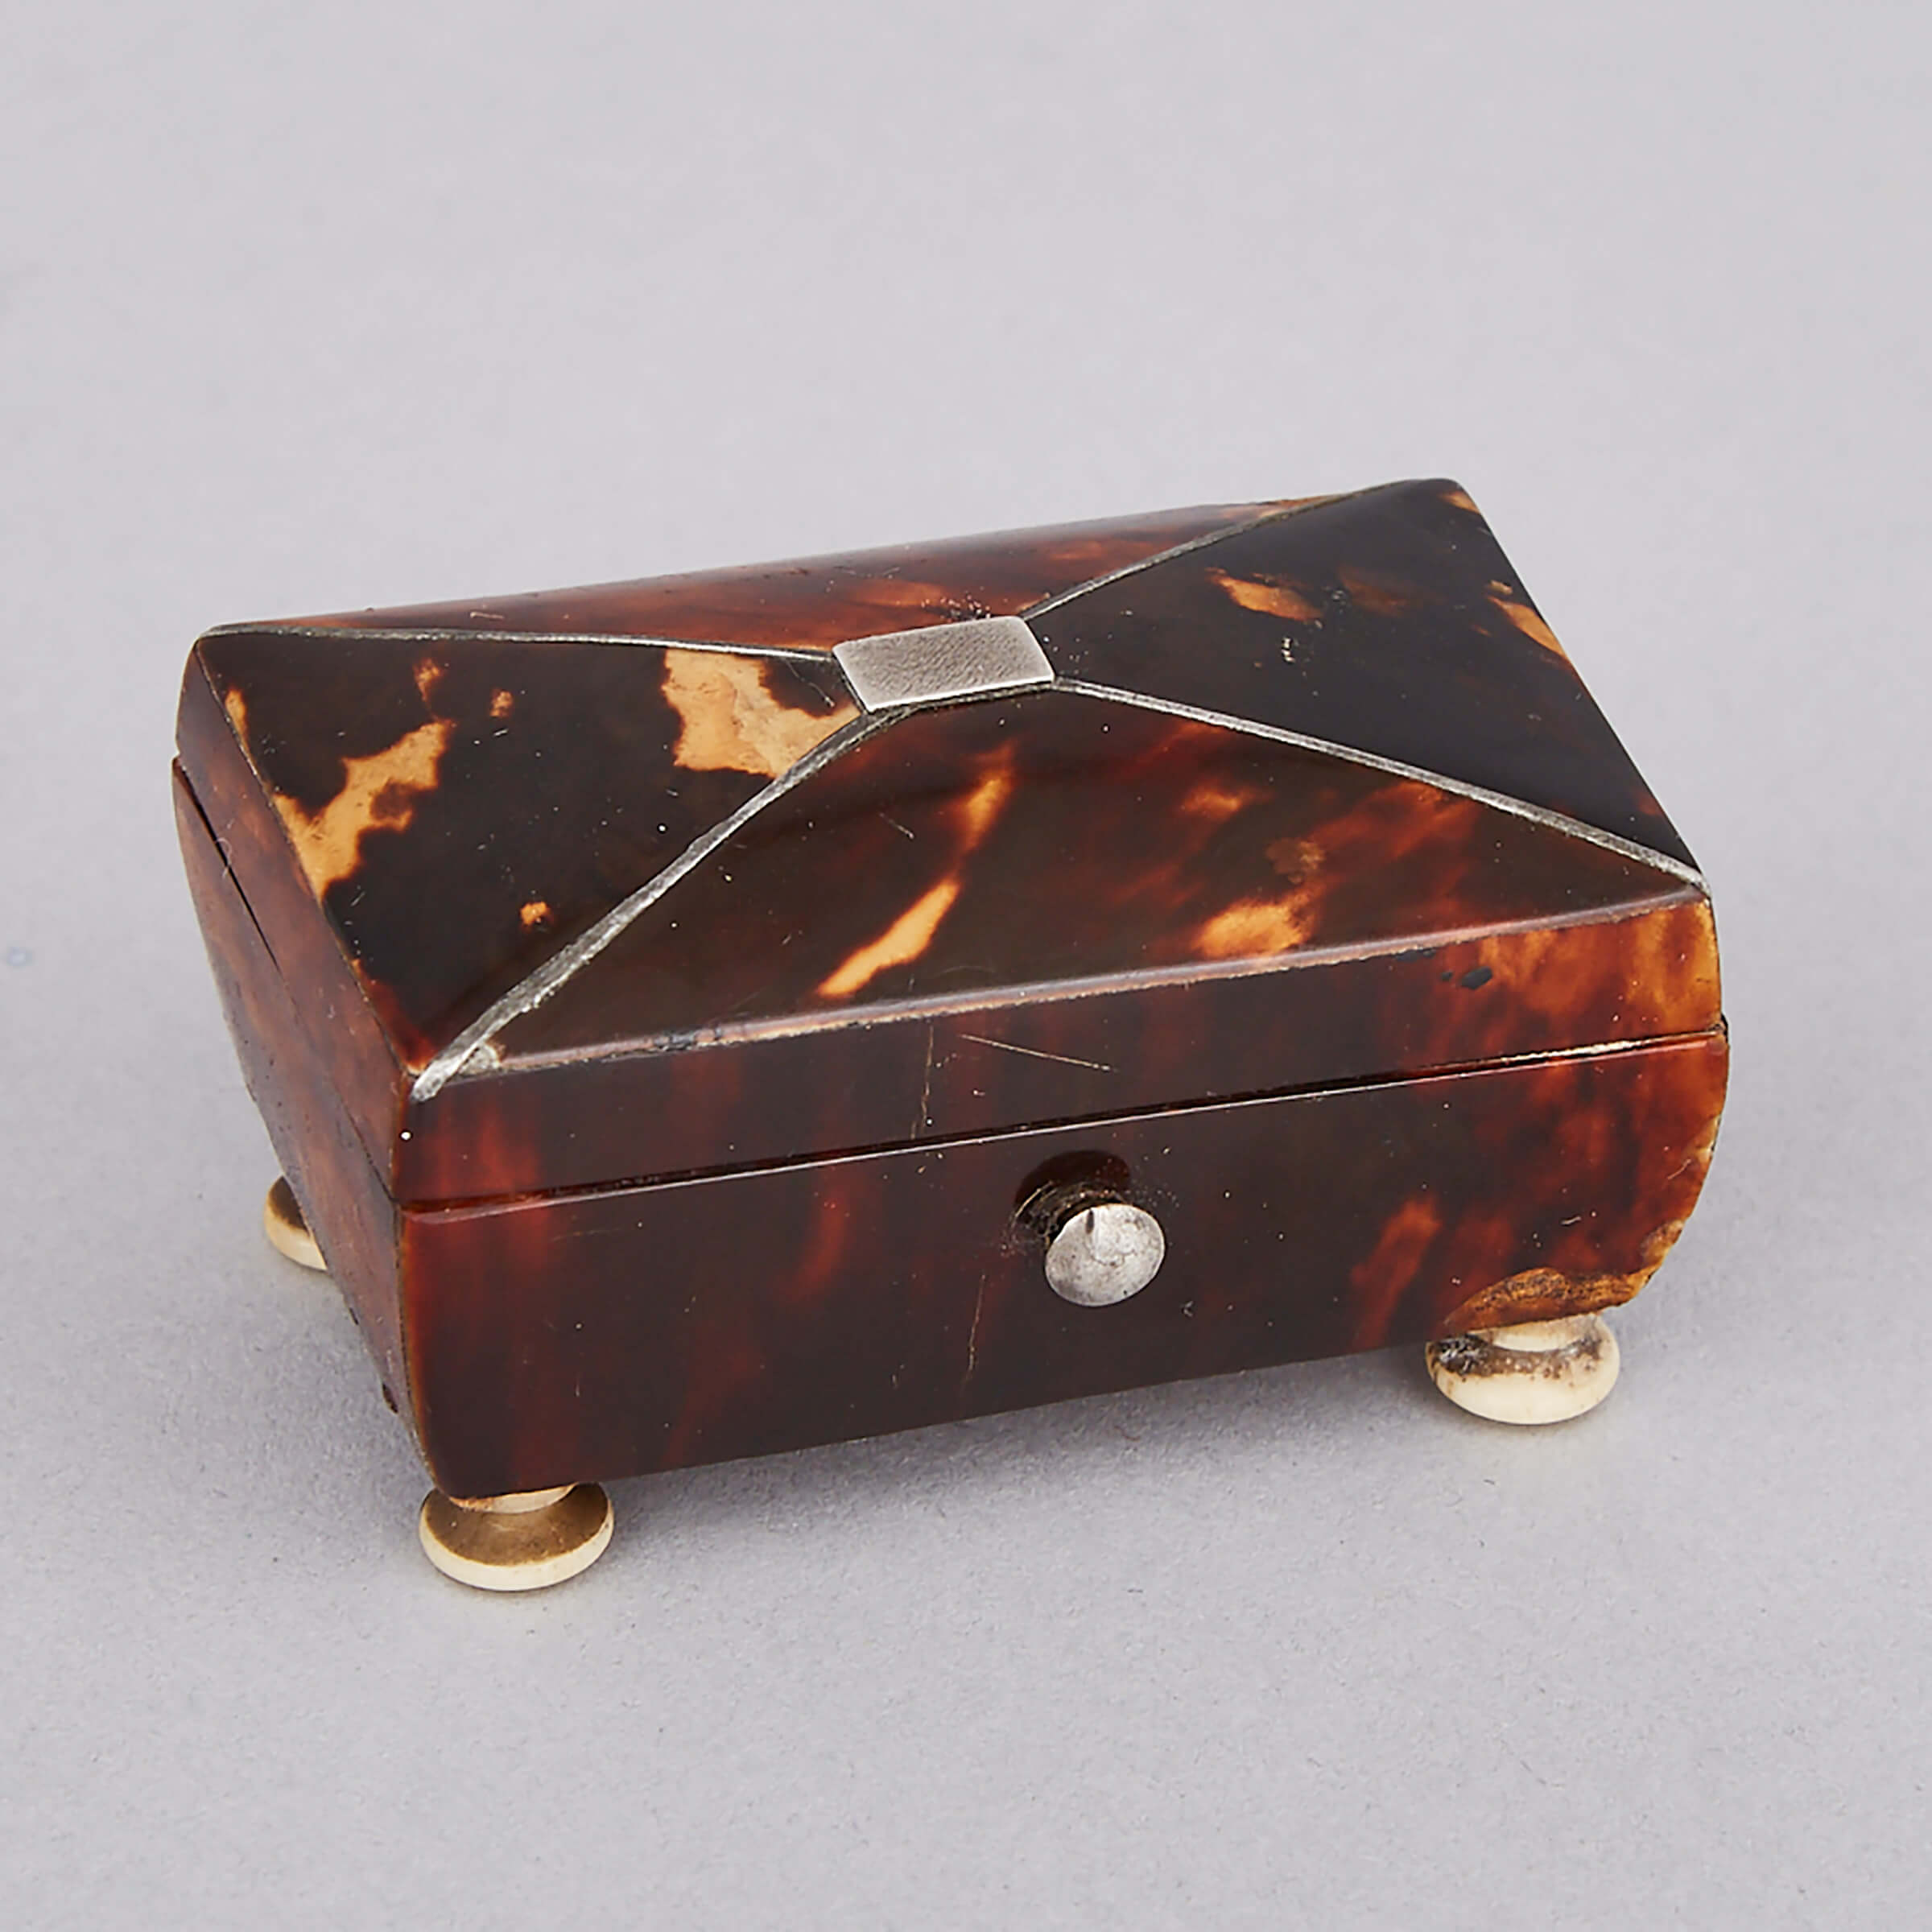 Regency Ivory and Silver Mounted Tortoiseshell Caddy Form Snuff Box, early 19th century